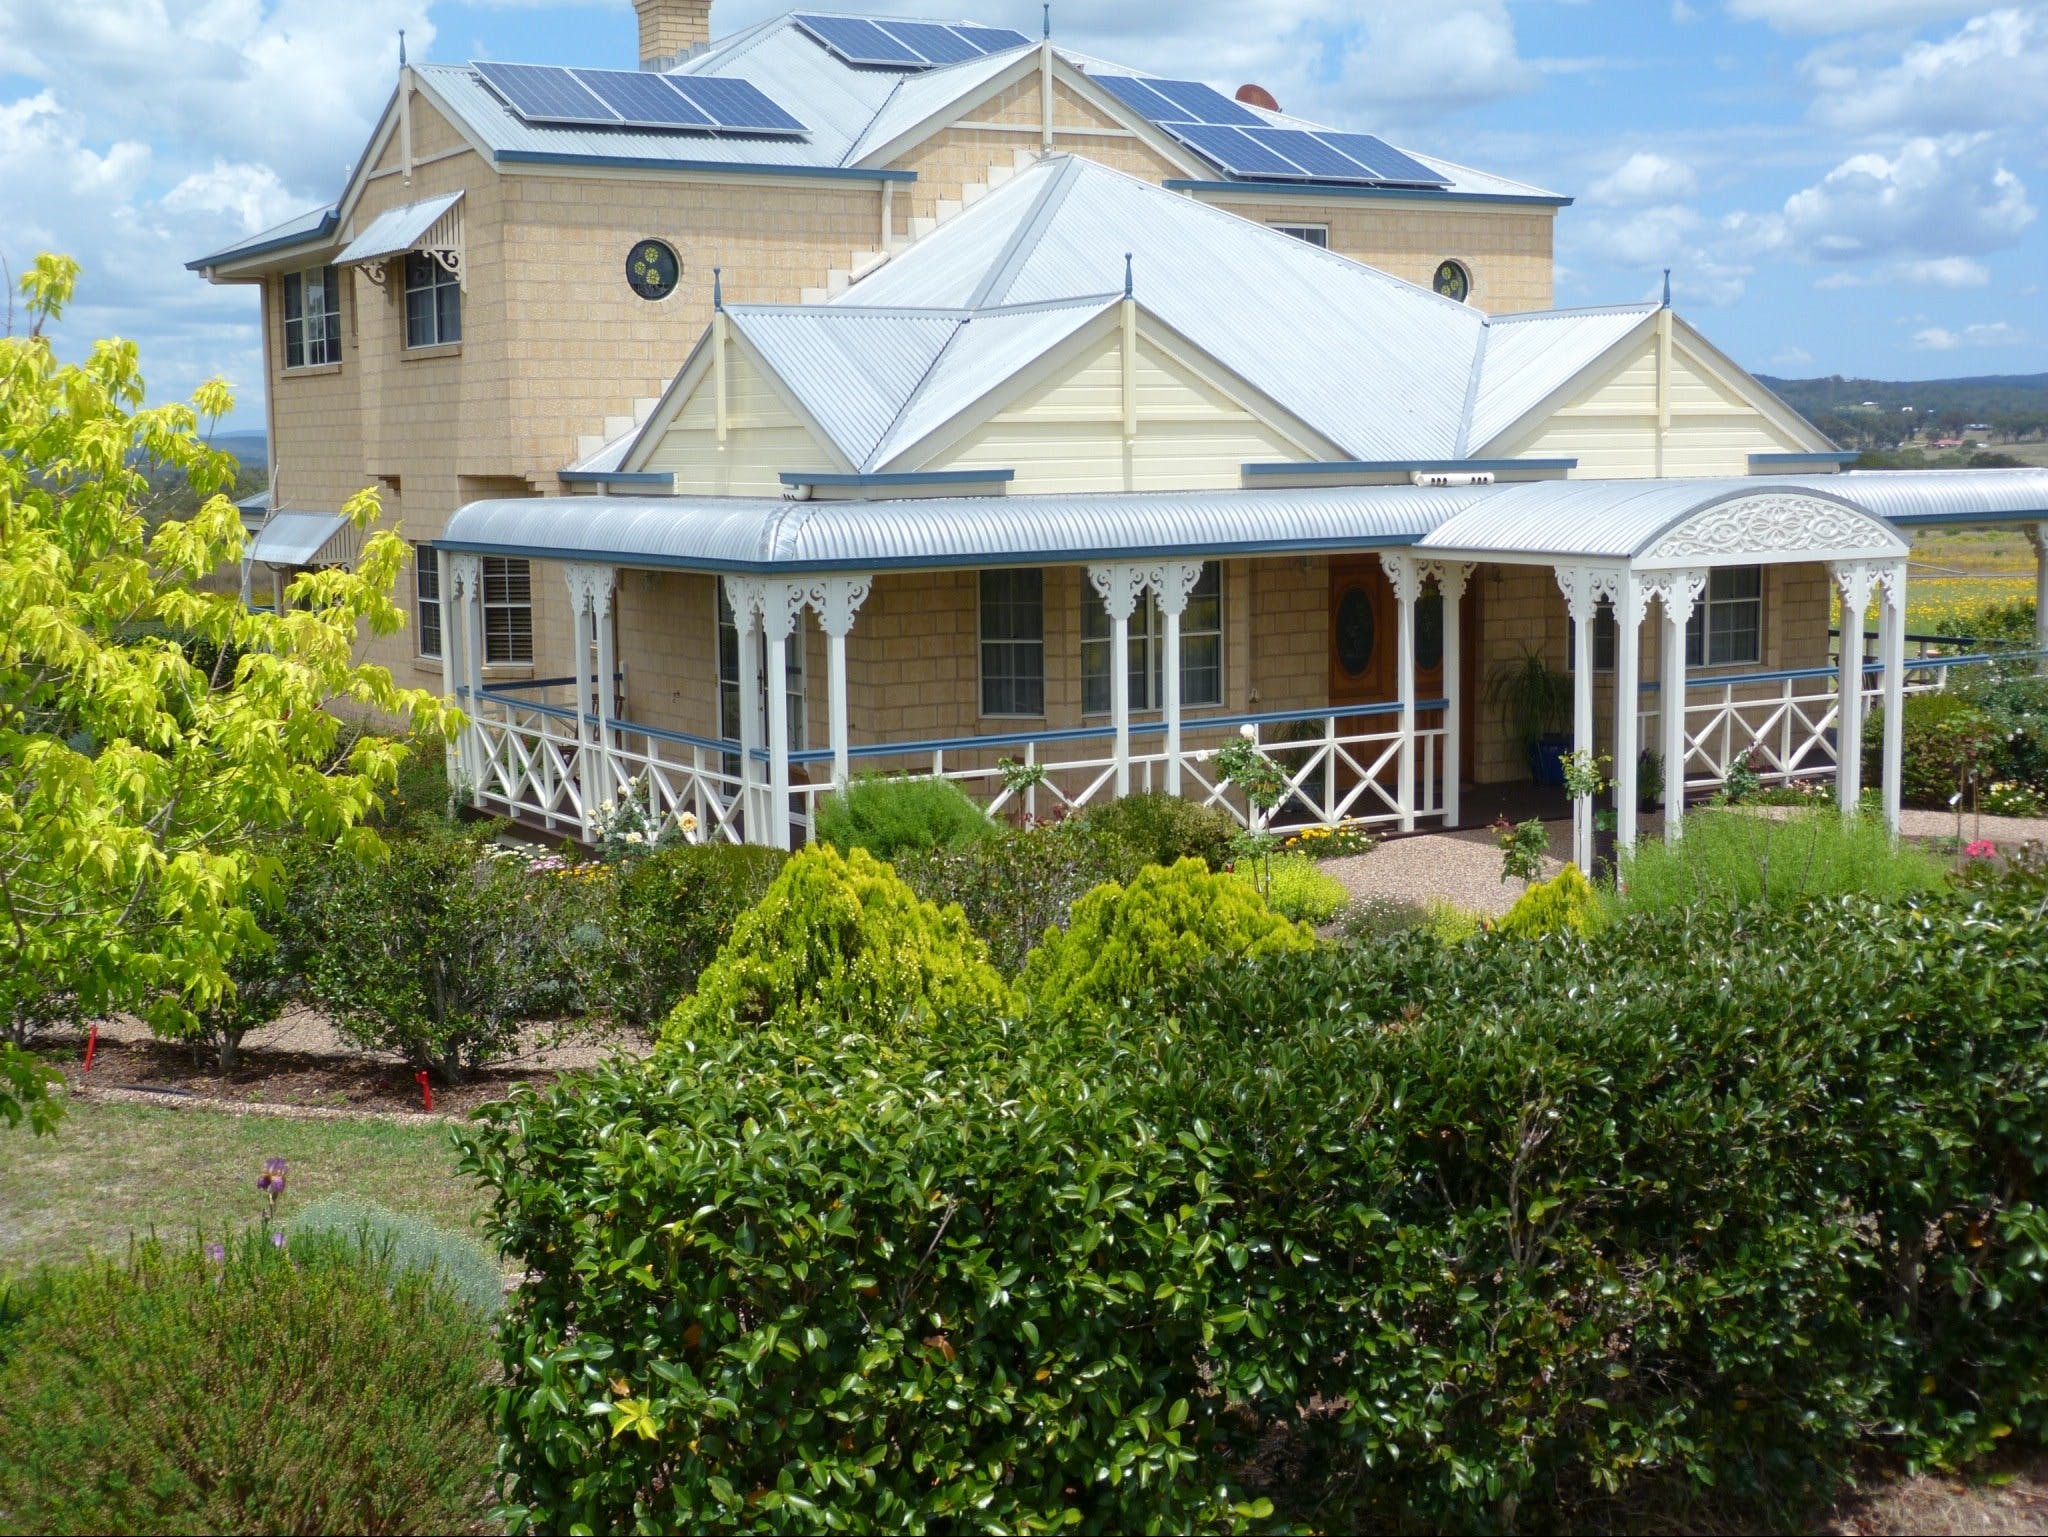 Grovely House Bed and Breakfast - Townsville Tourism